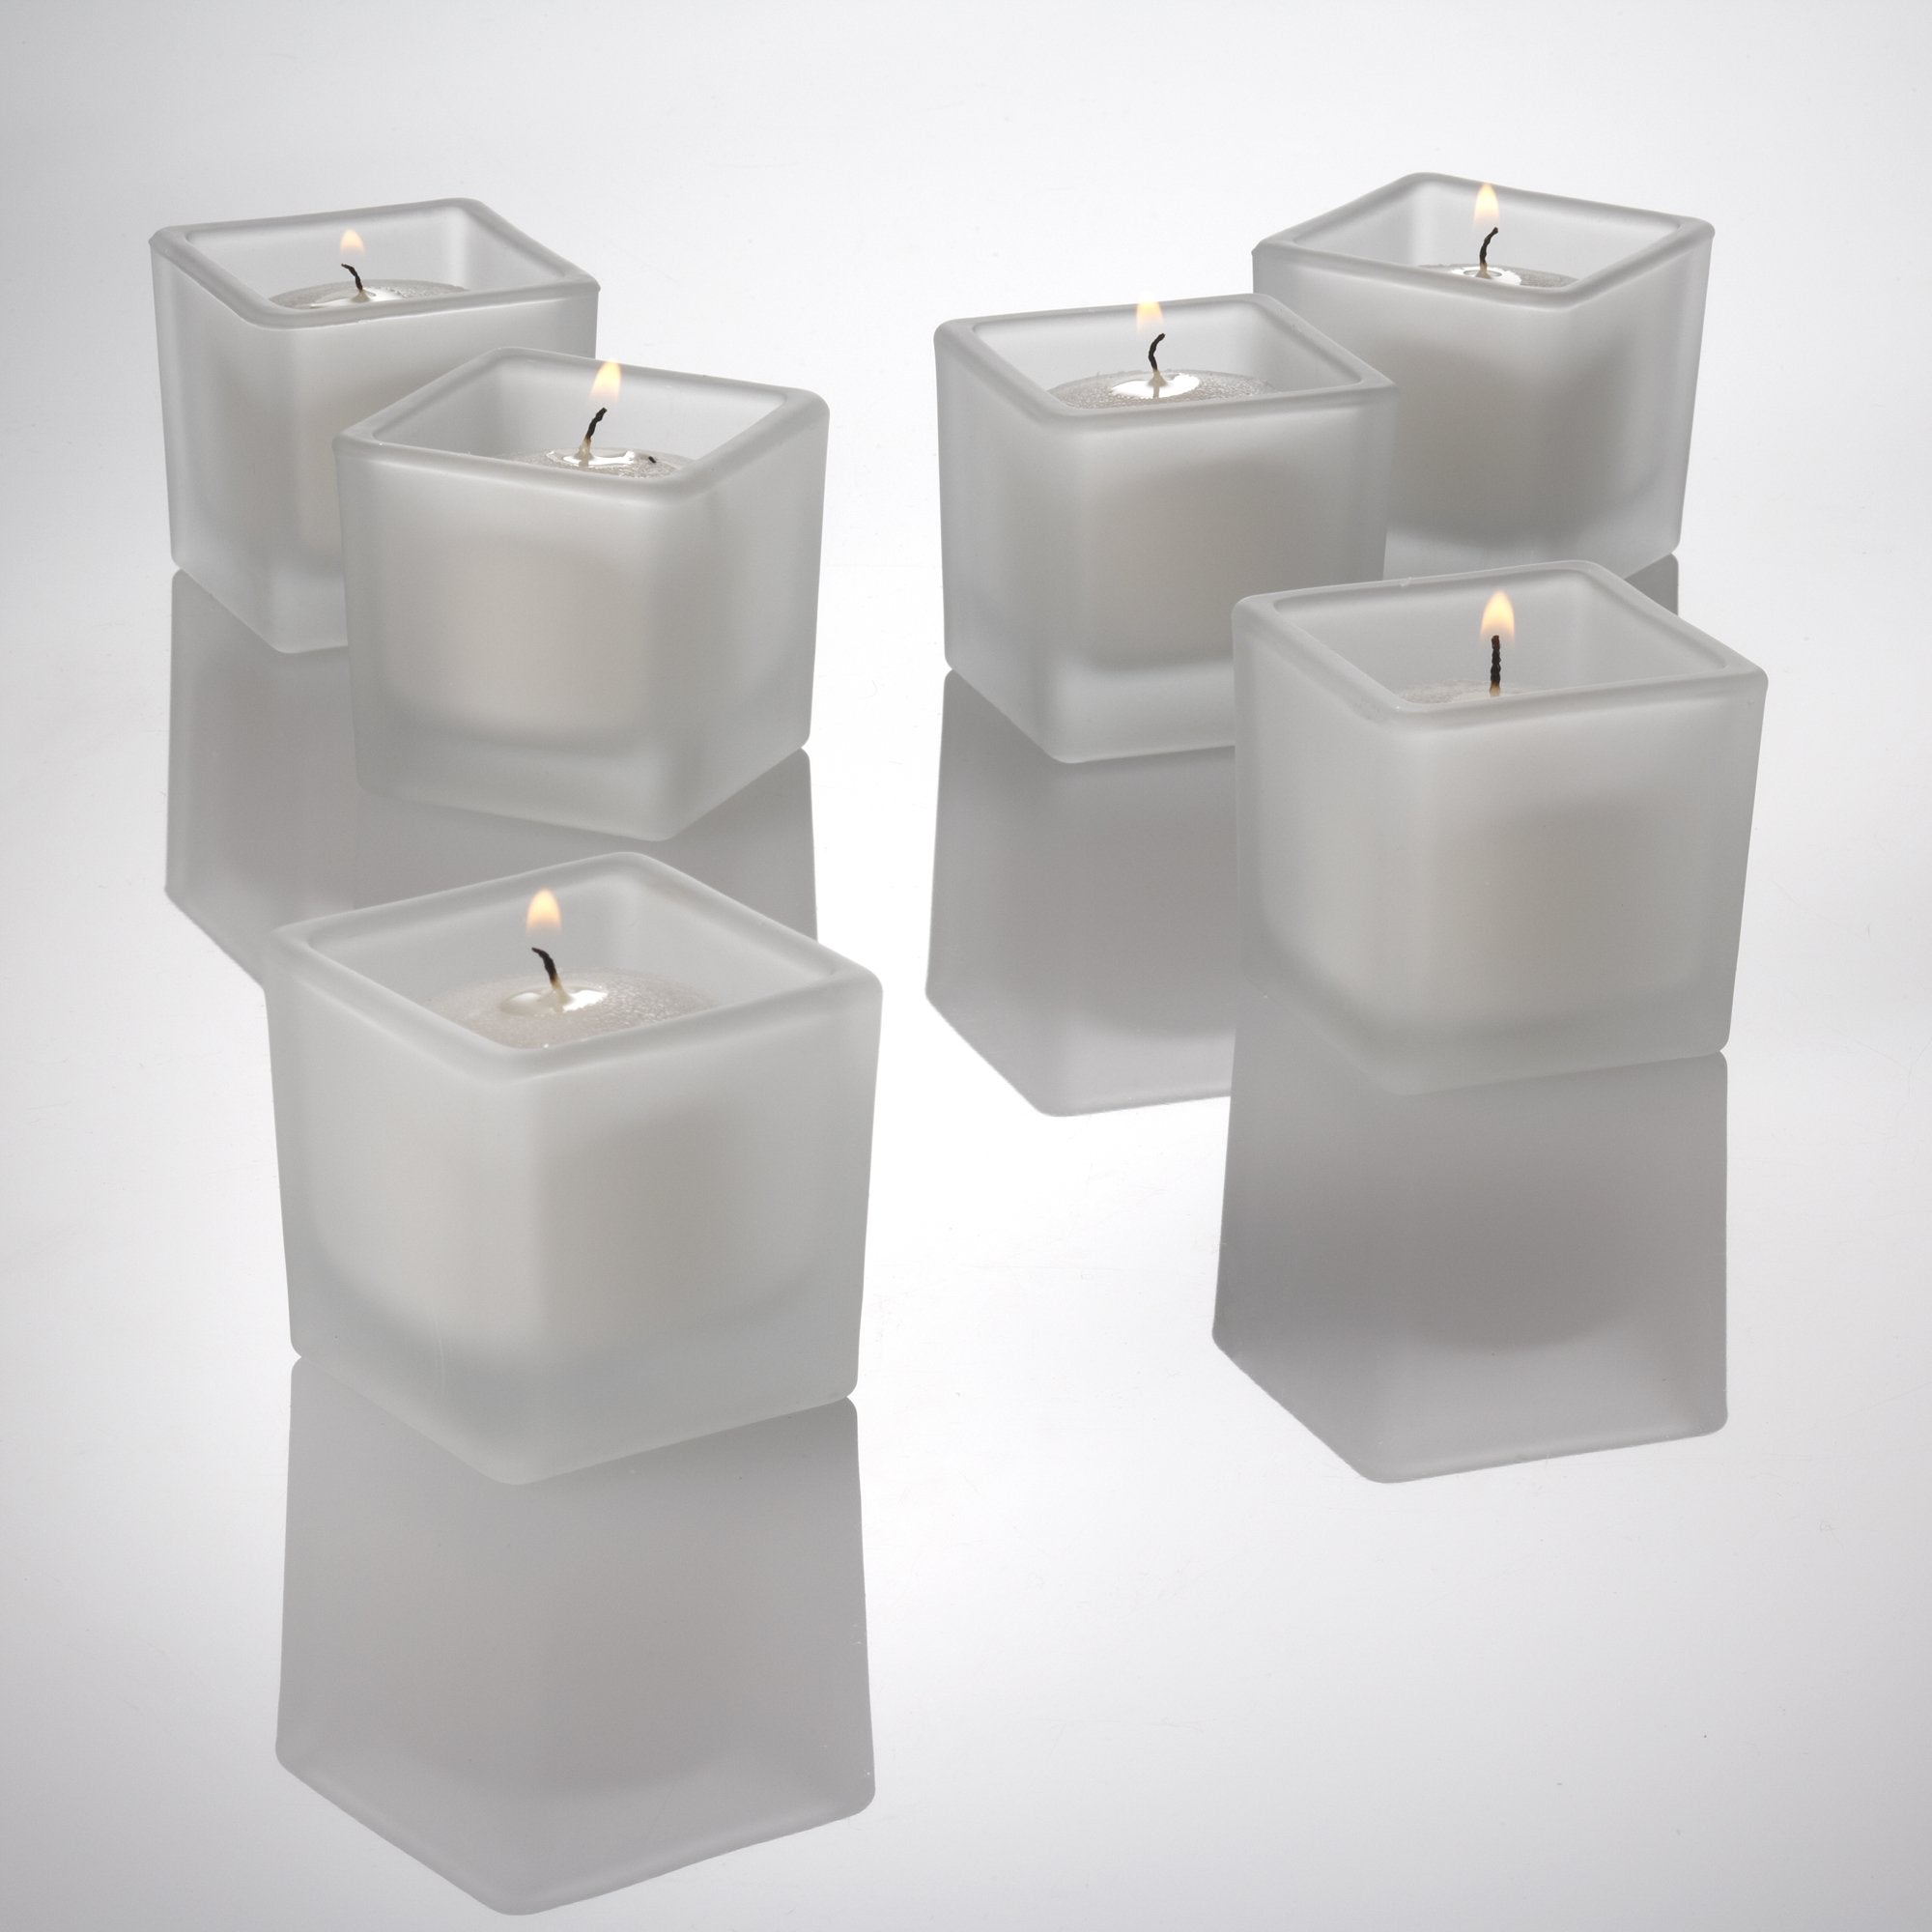 Eastland Tealight Candle Holder Set of 12 - Quick Candles